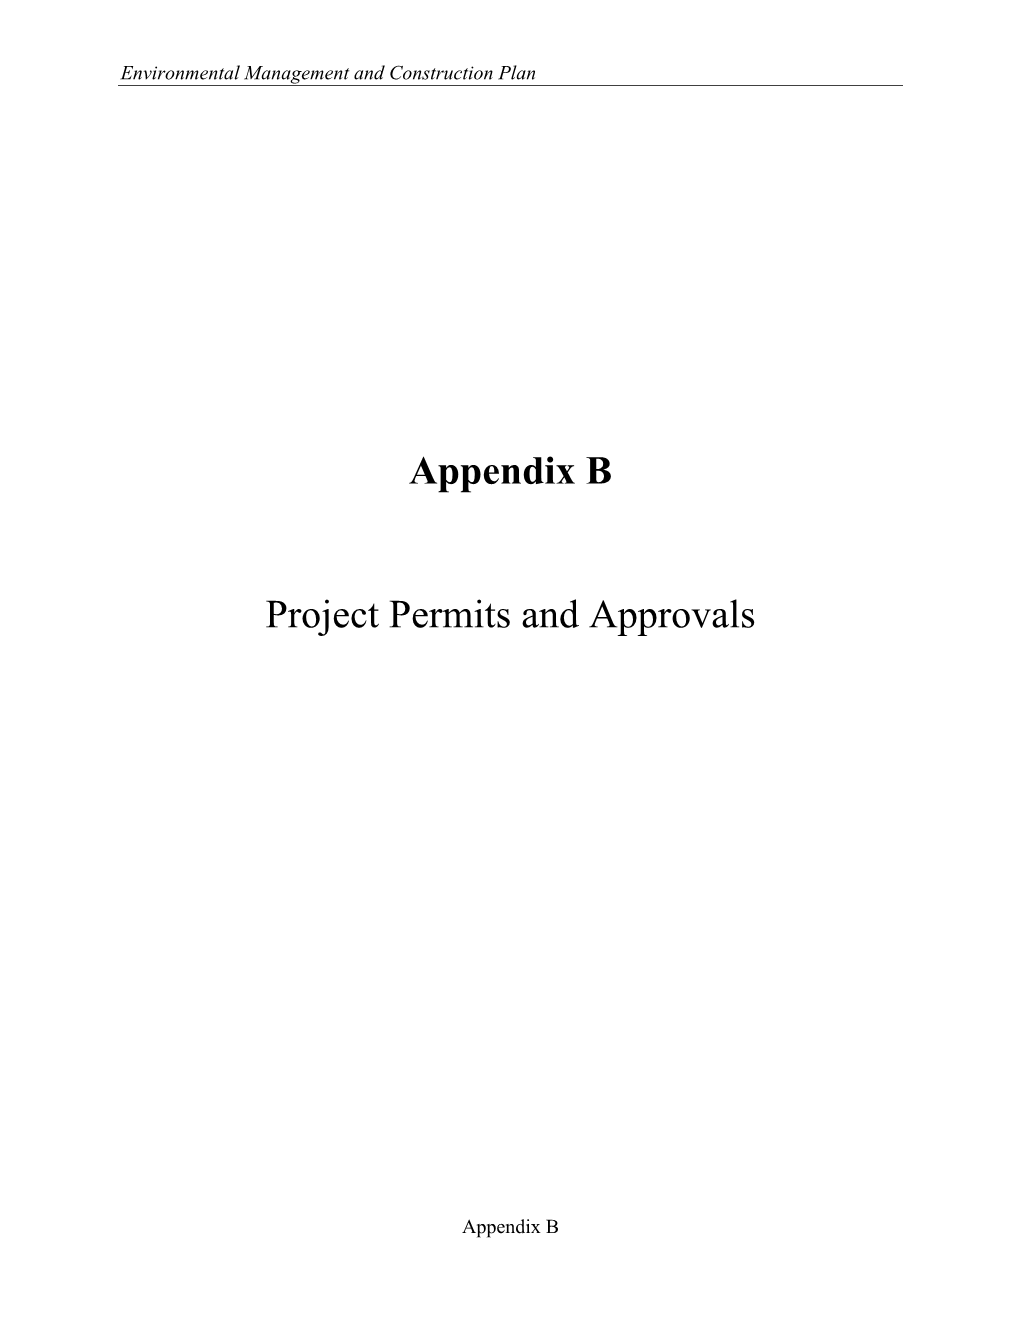 Appendix B Project Permits and Approvals